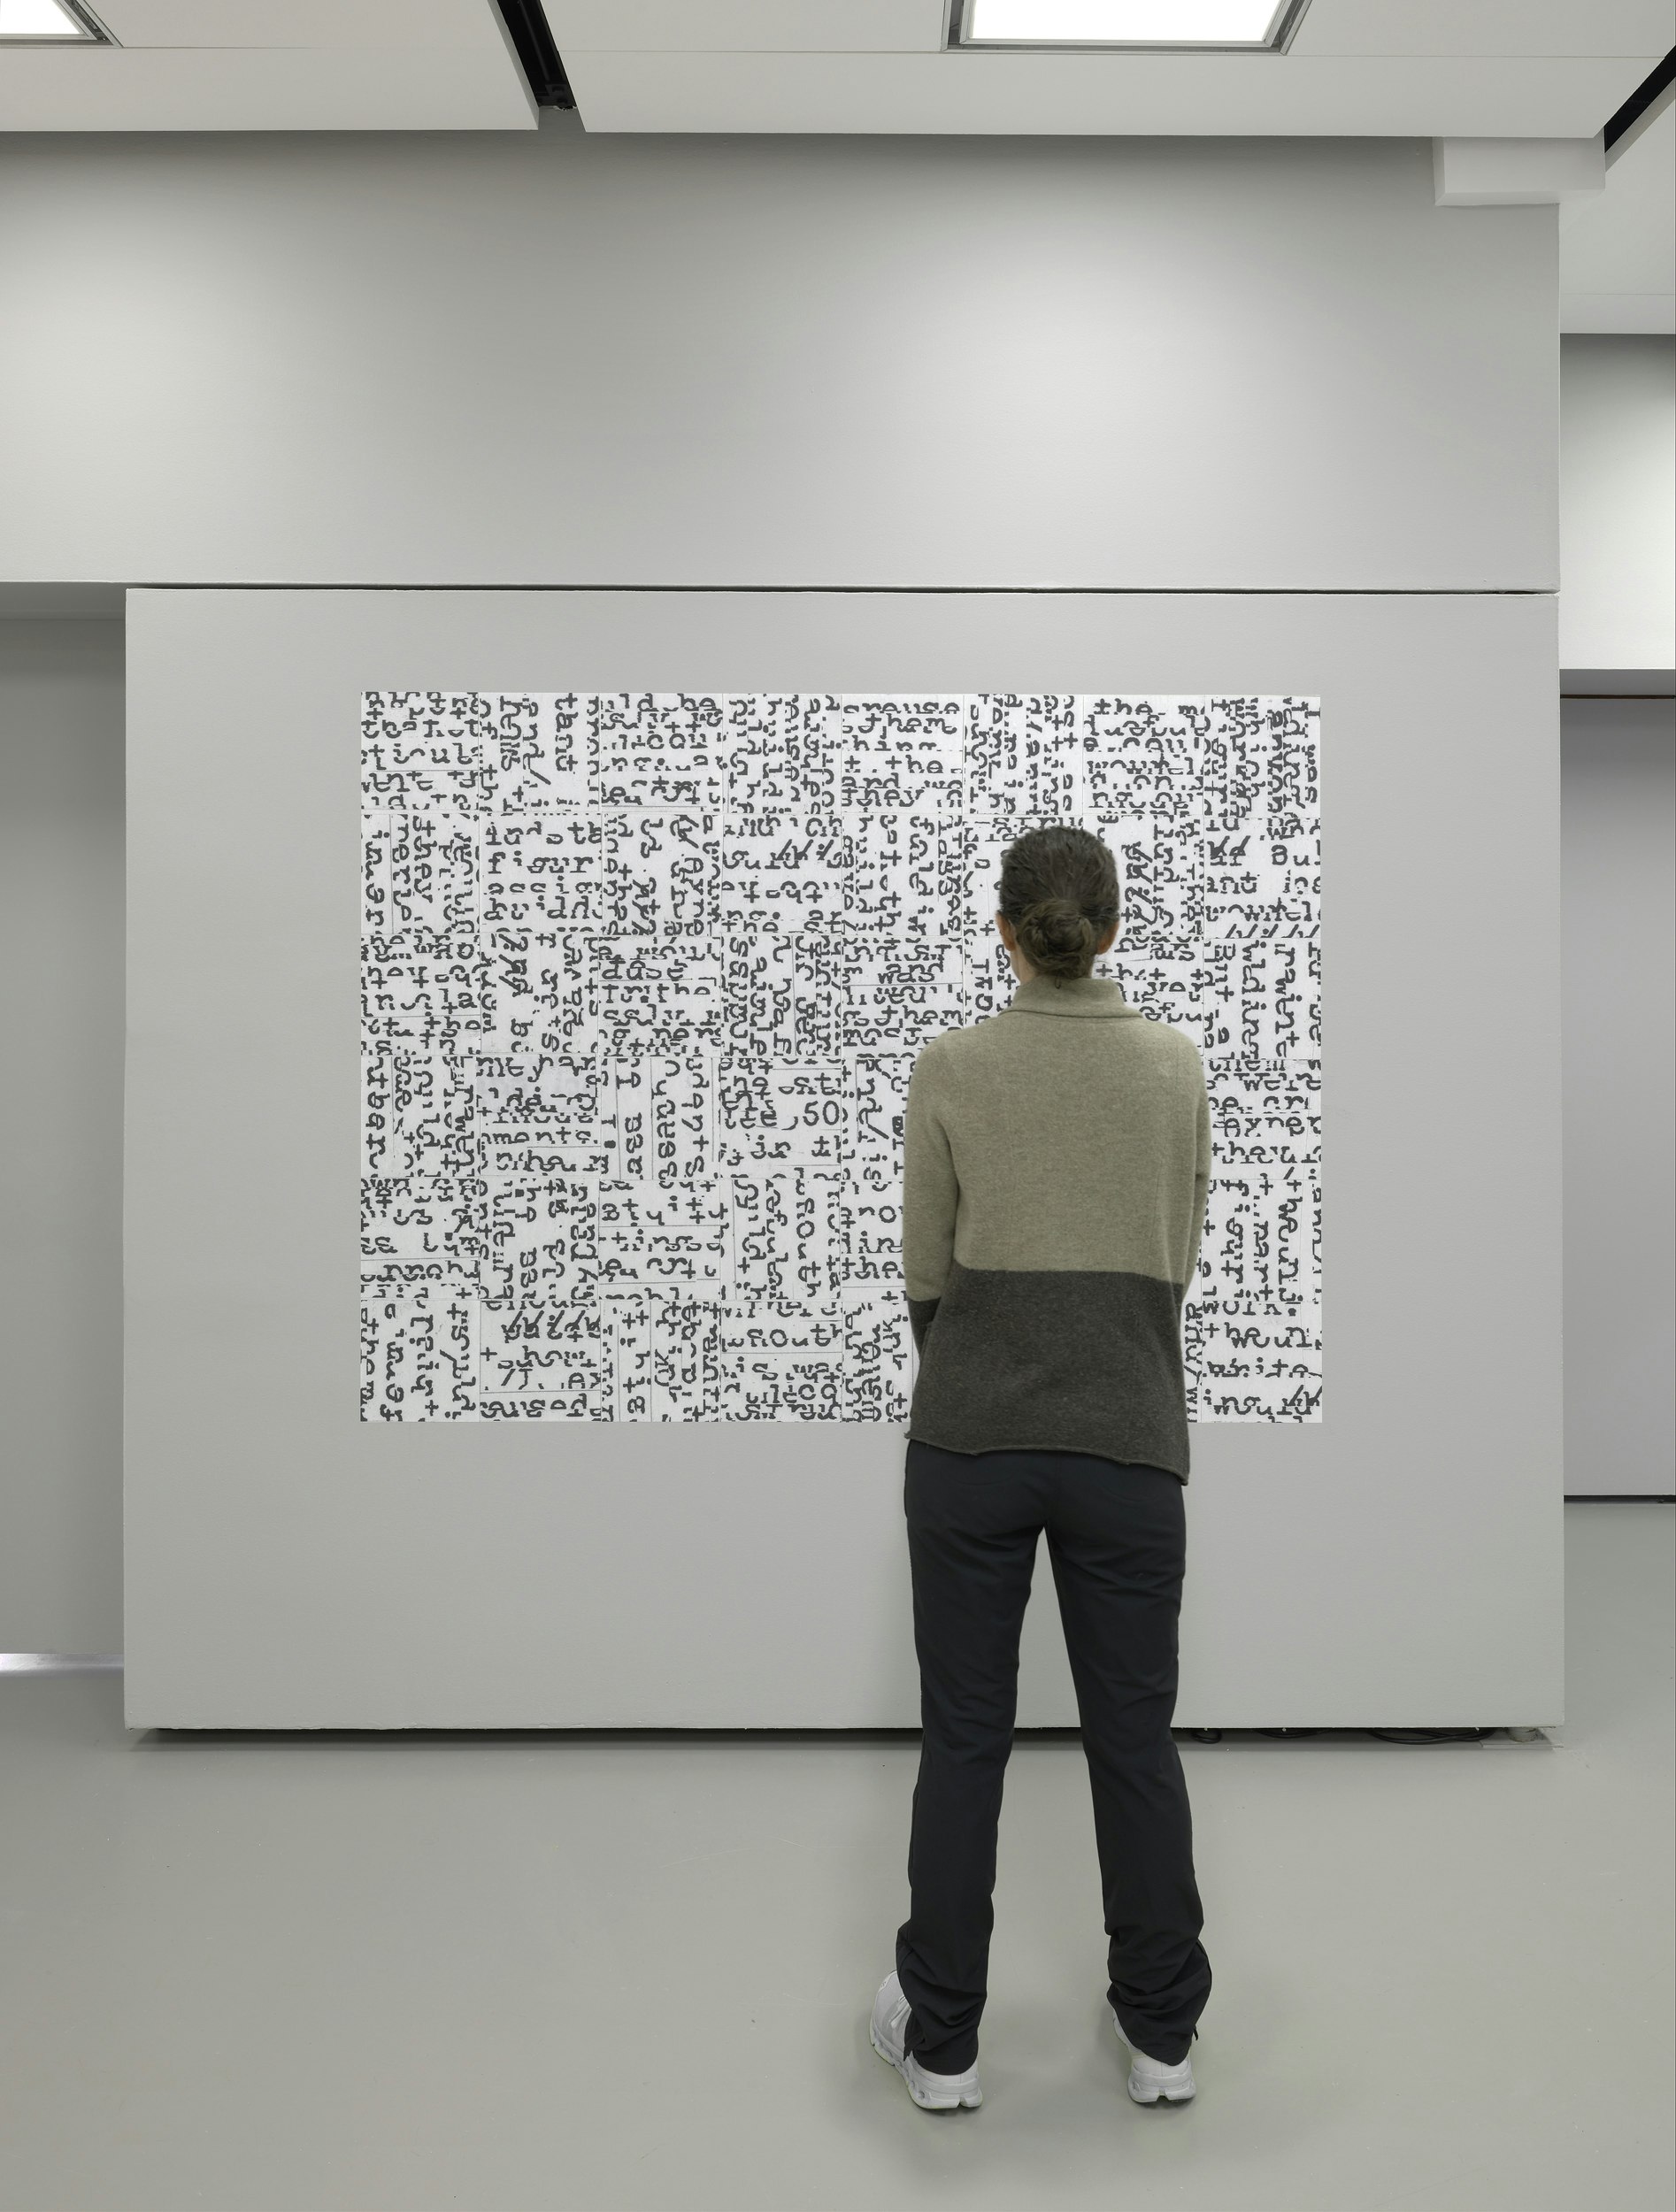 A person stands in front of a vinyl collage, contemplating the artwork.